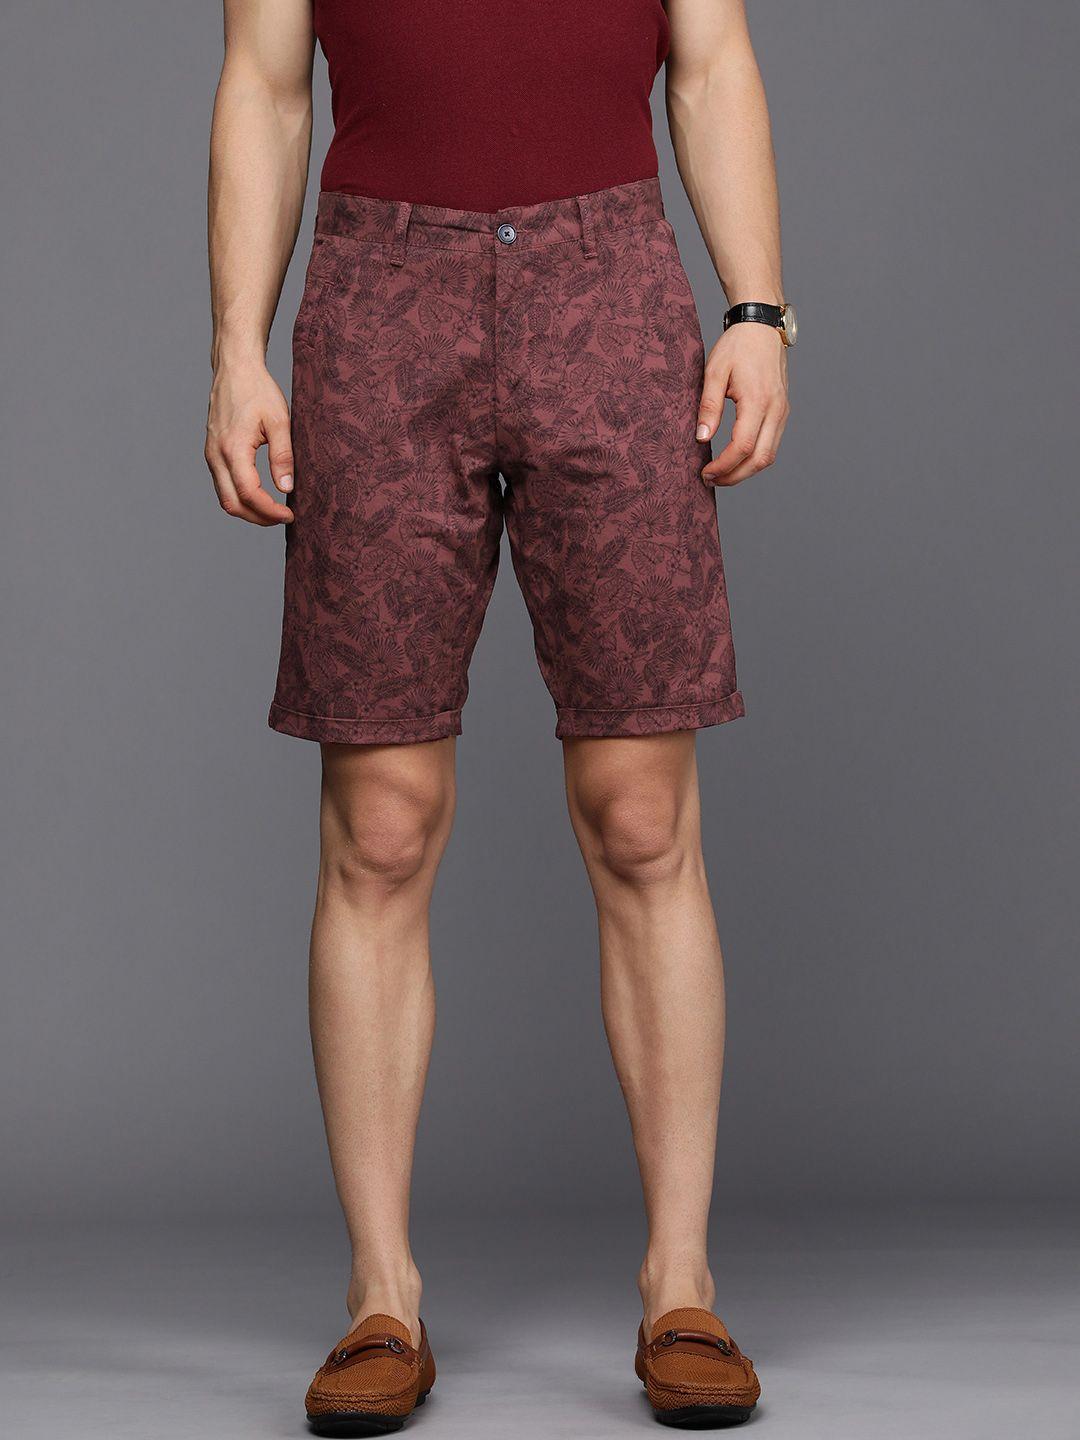 louis-philippe-sport-men-maroon-floral-printed-slim-fit-low-rise-chino-shorts